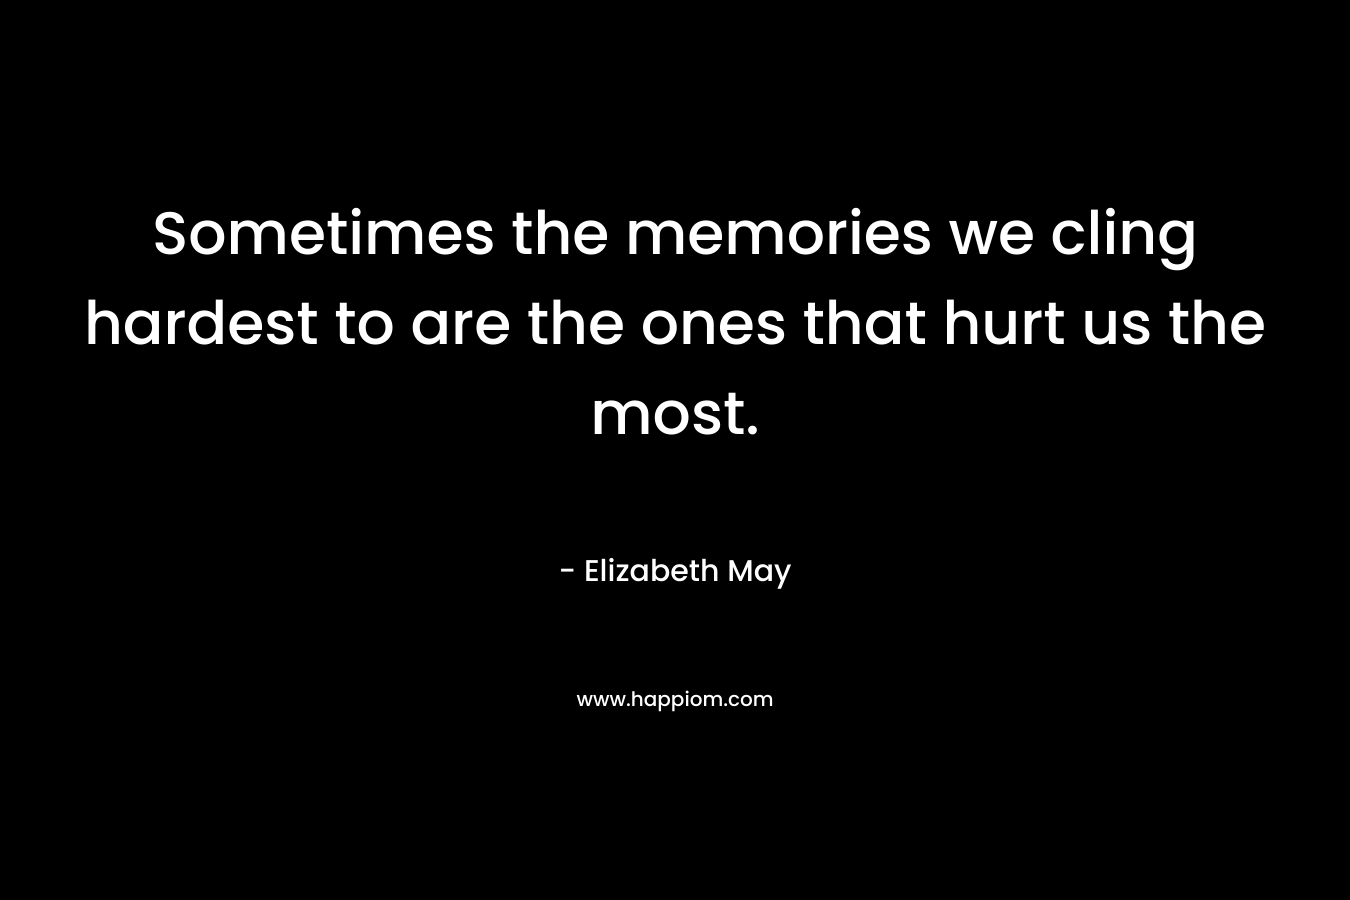 Sometimes the memories we cling hardest to are the ones that hurt us the most. – Elizabeth May